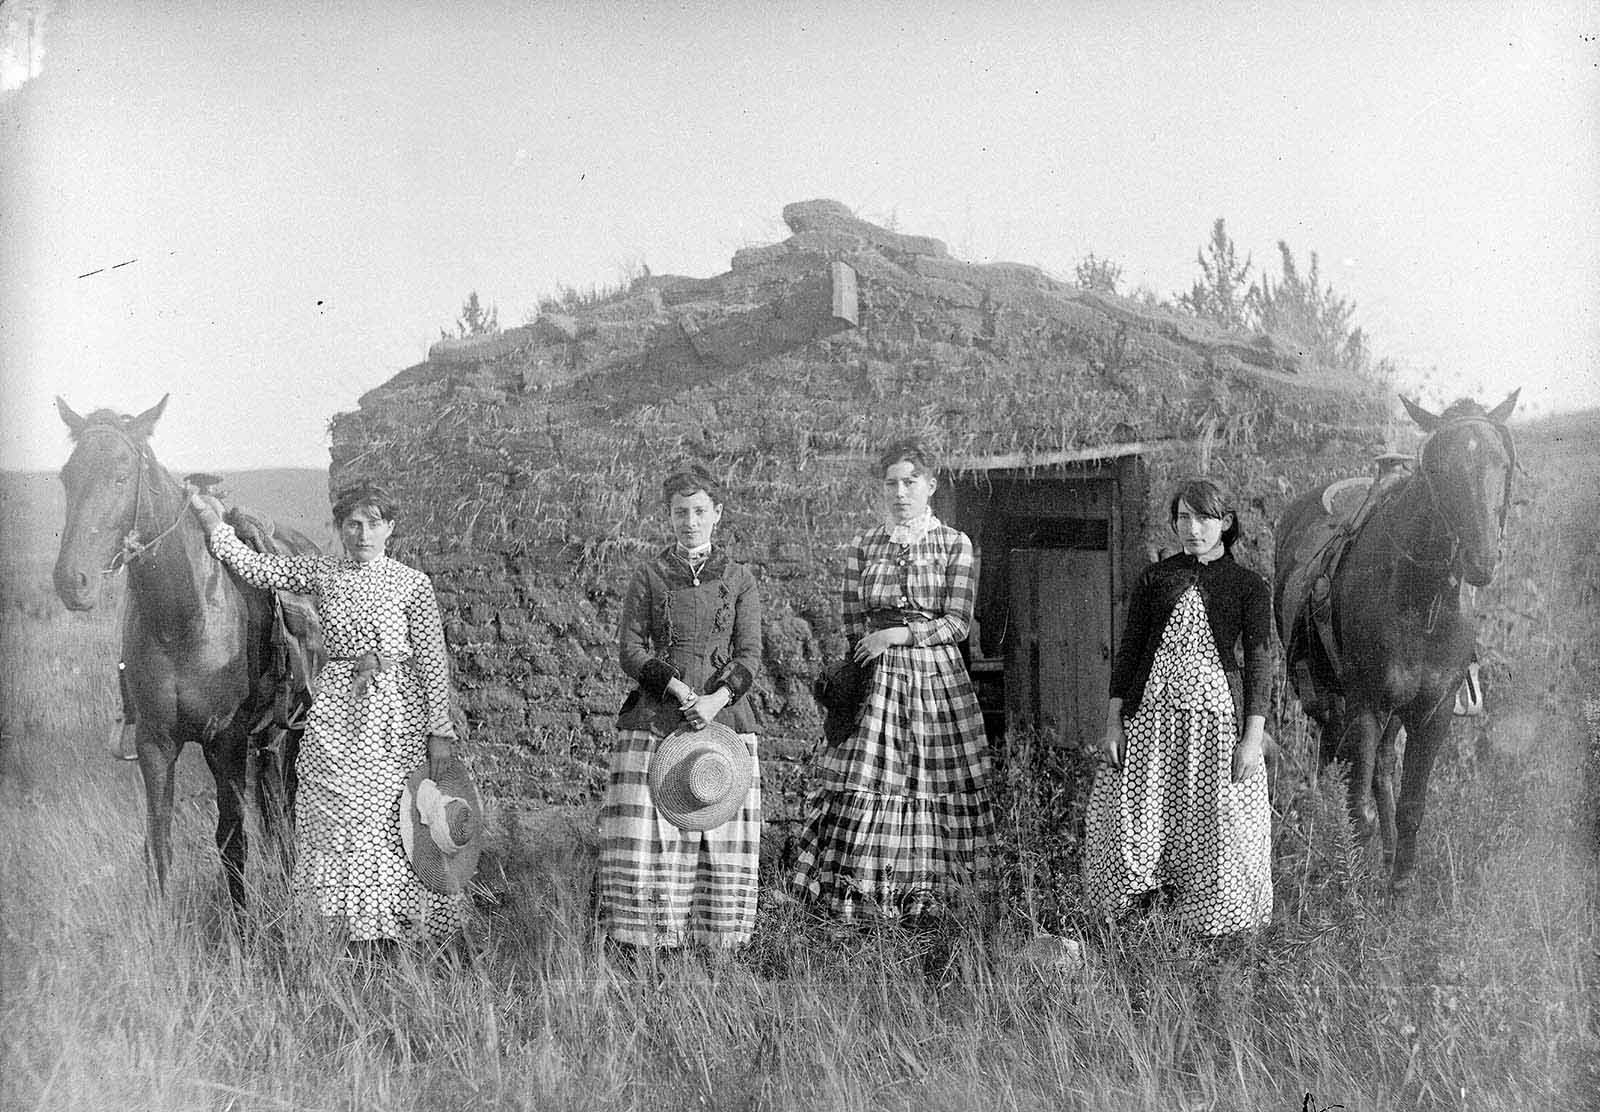 Harriet, Elizabeth, Lucie, and Ruth Chrisman at their sod house in Custer County, Nebraska, 1886.